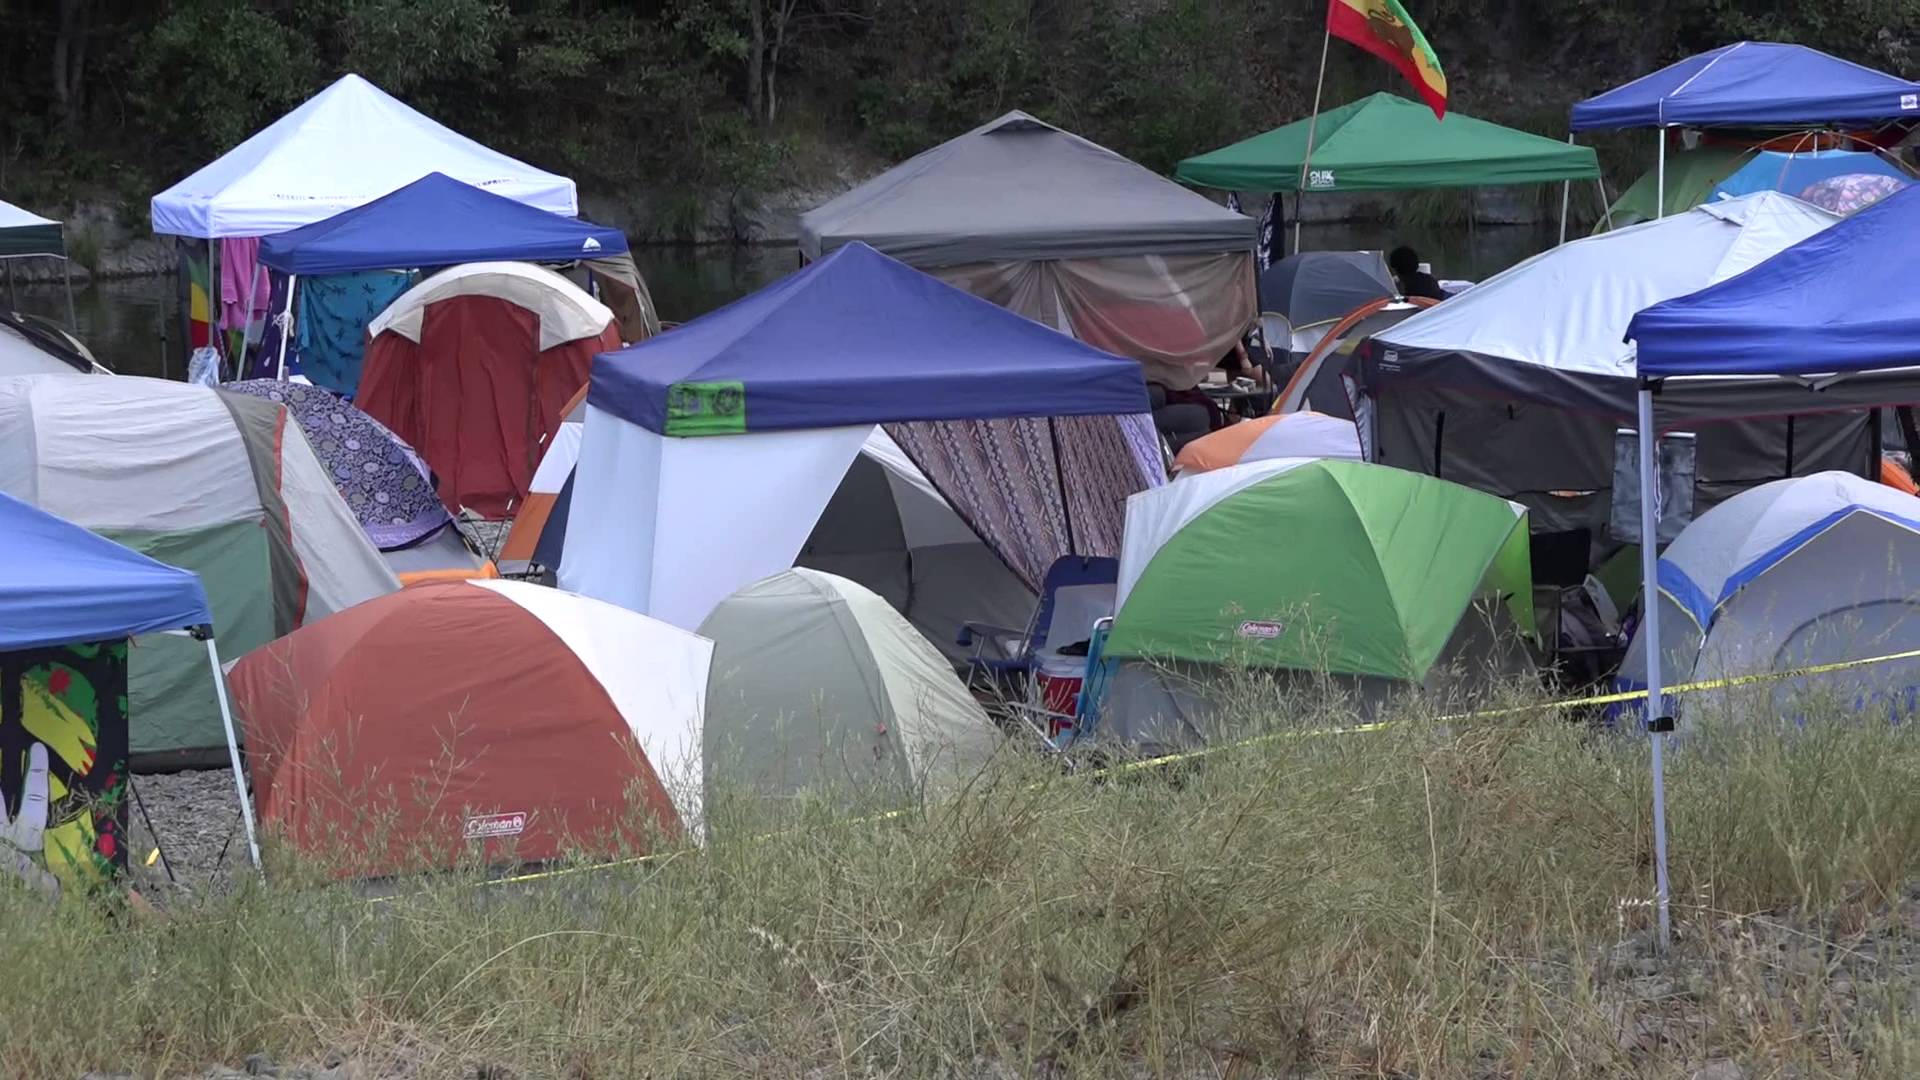 Camping @ Reggae On The River 2014 [7/31/2014]